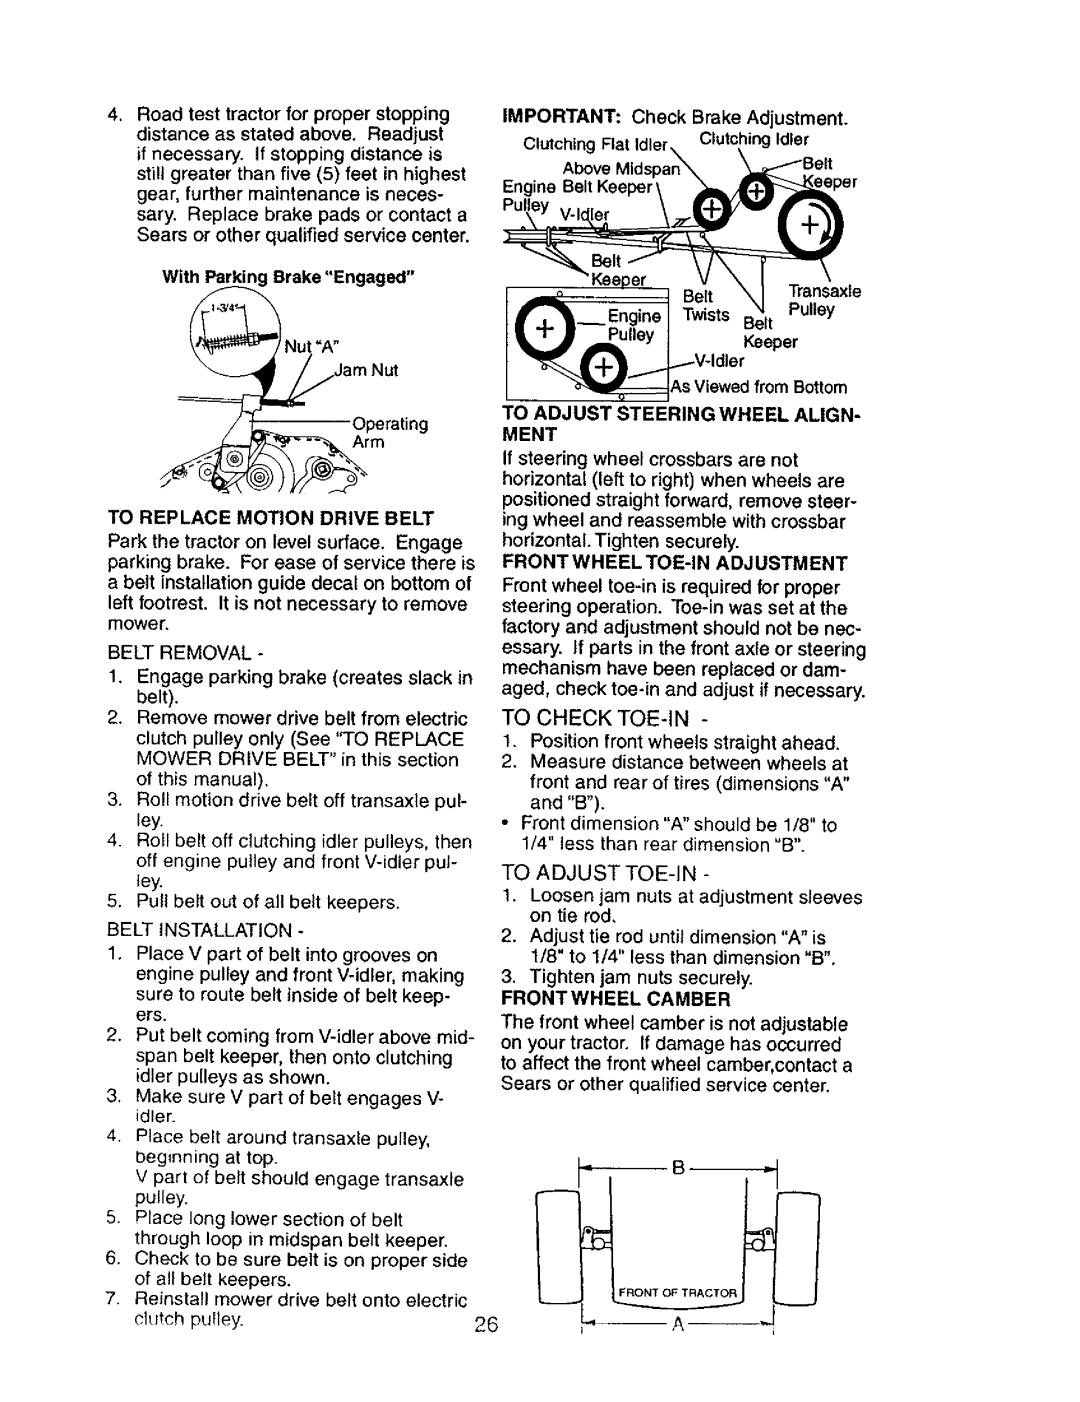 Craftsman 917.27603 manual To Replace Motion Drive Belt 